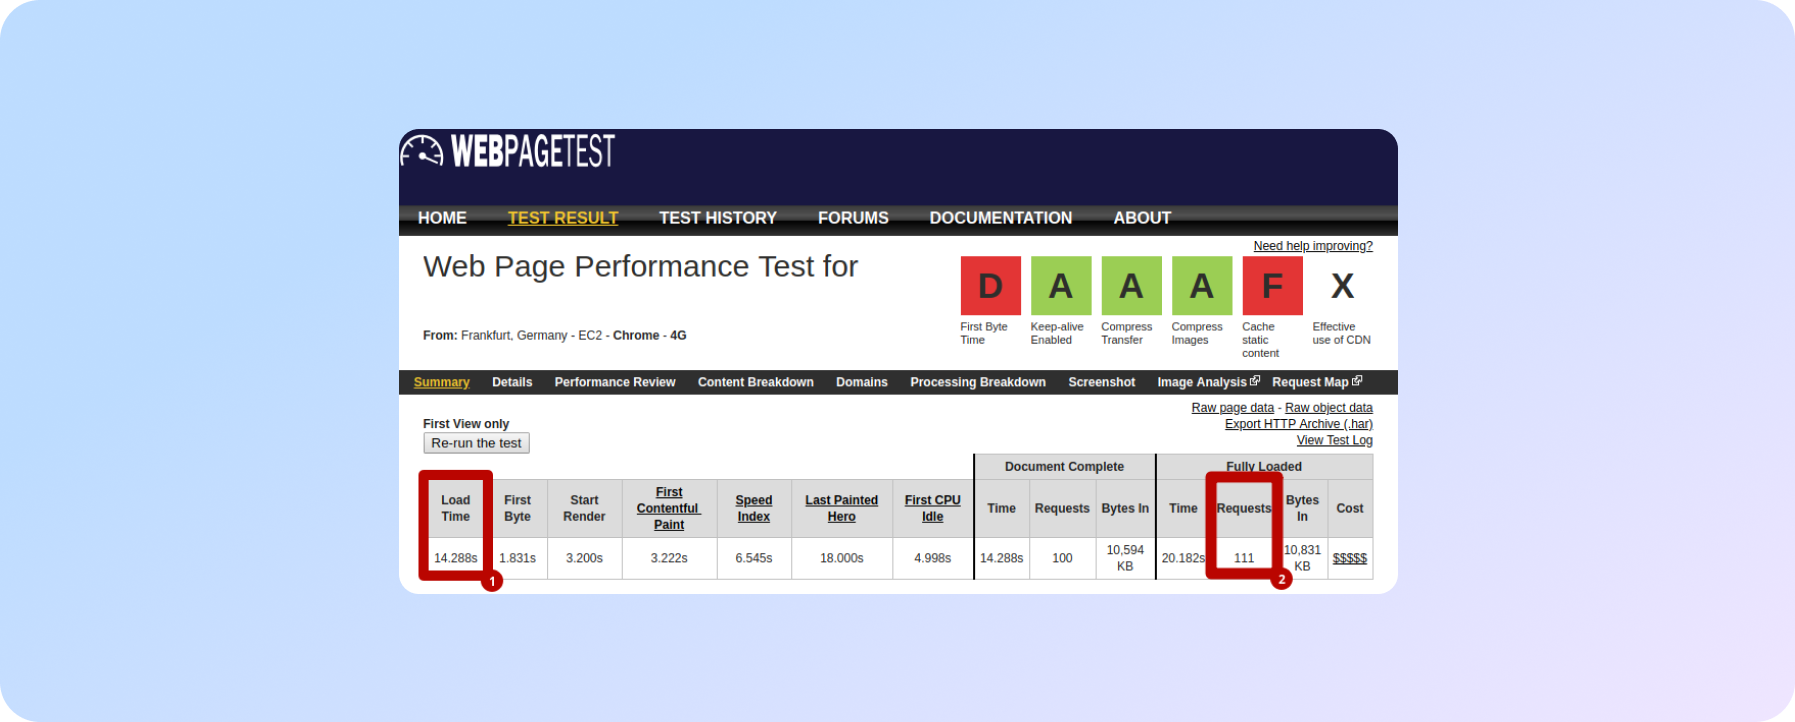 Page loading speed assessment through the webpagetest.org service